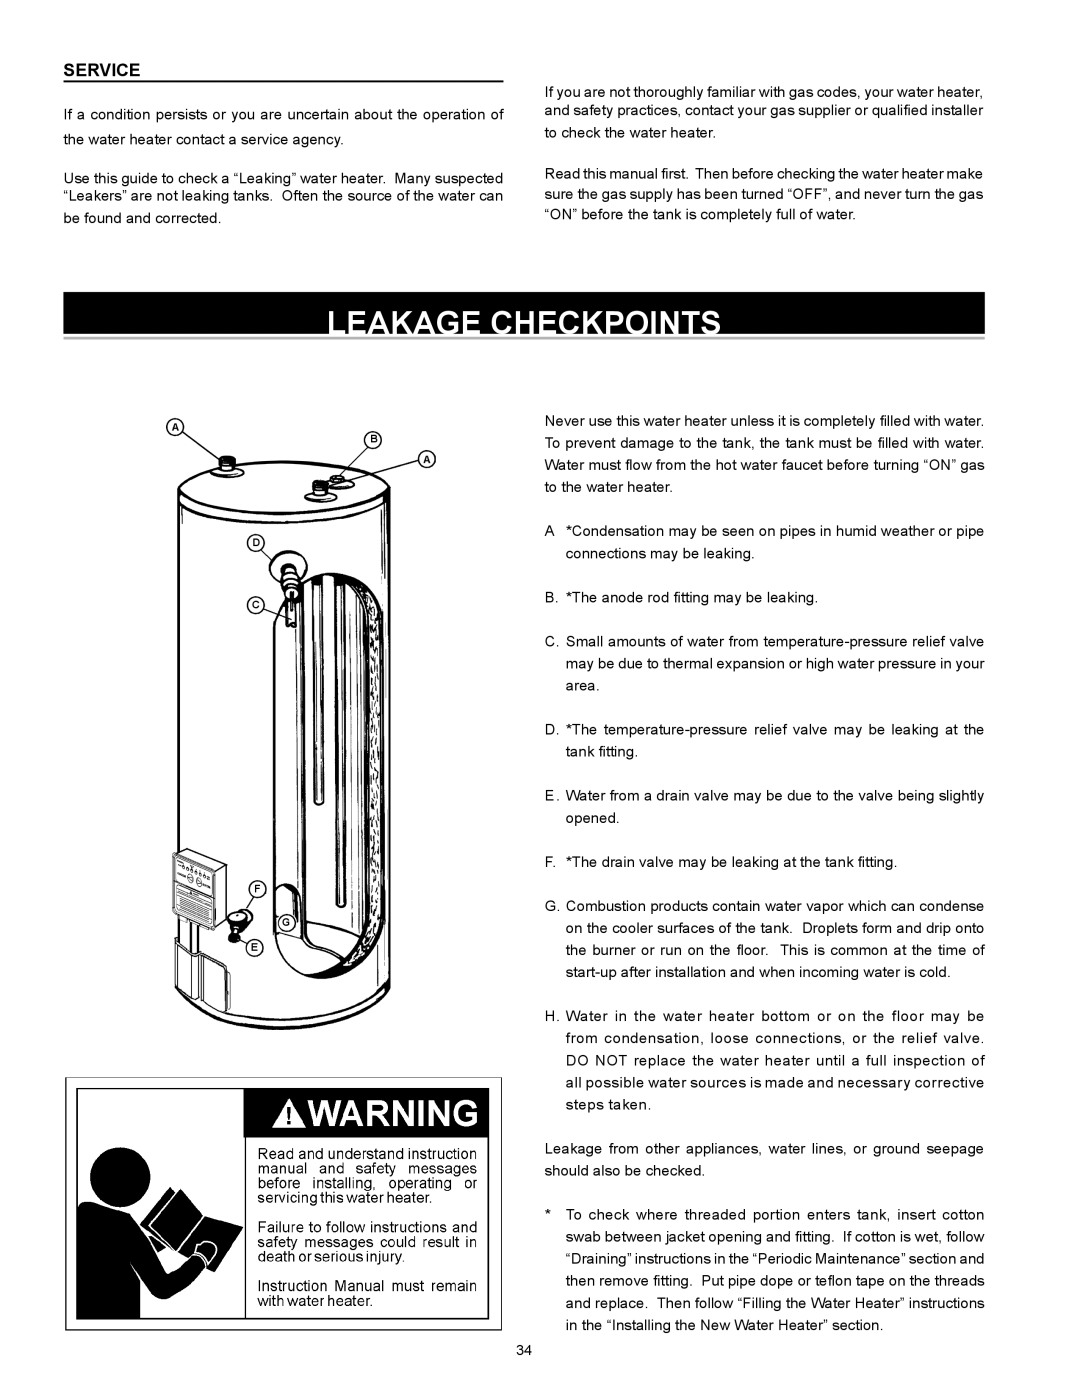 Reliance Water Heaters HE50 76N Series 100, 317775-000 instruction manual Leakage Checkpoints, Service 